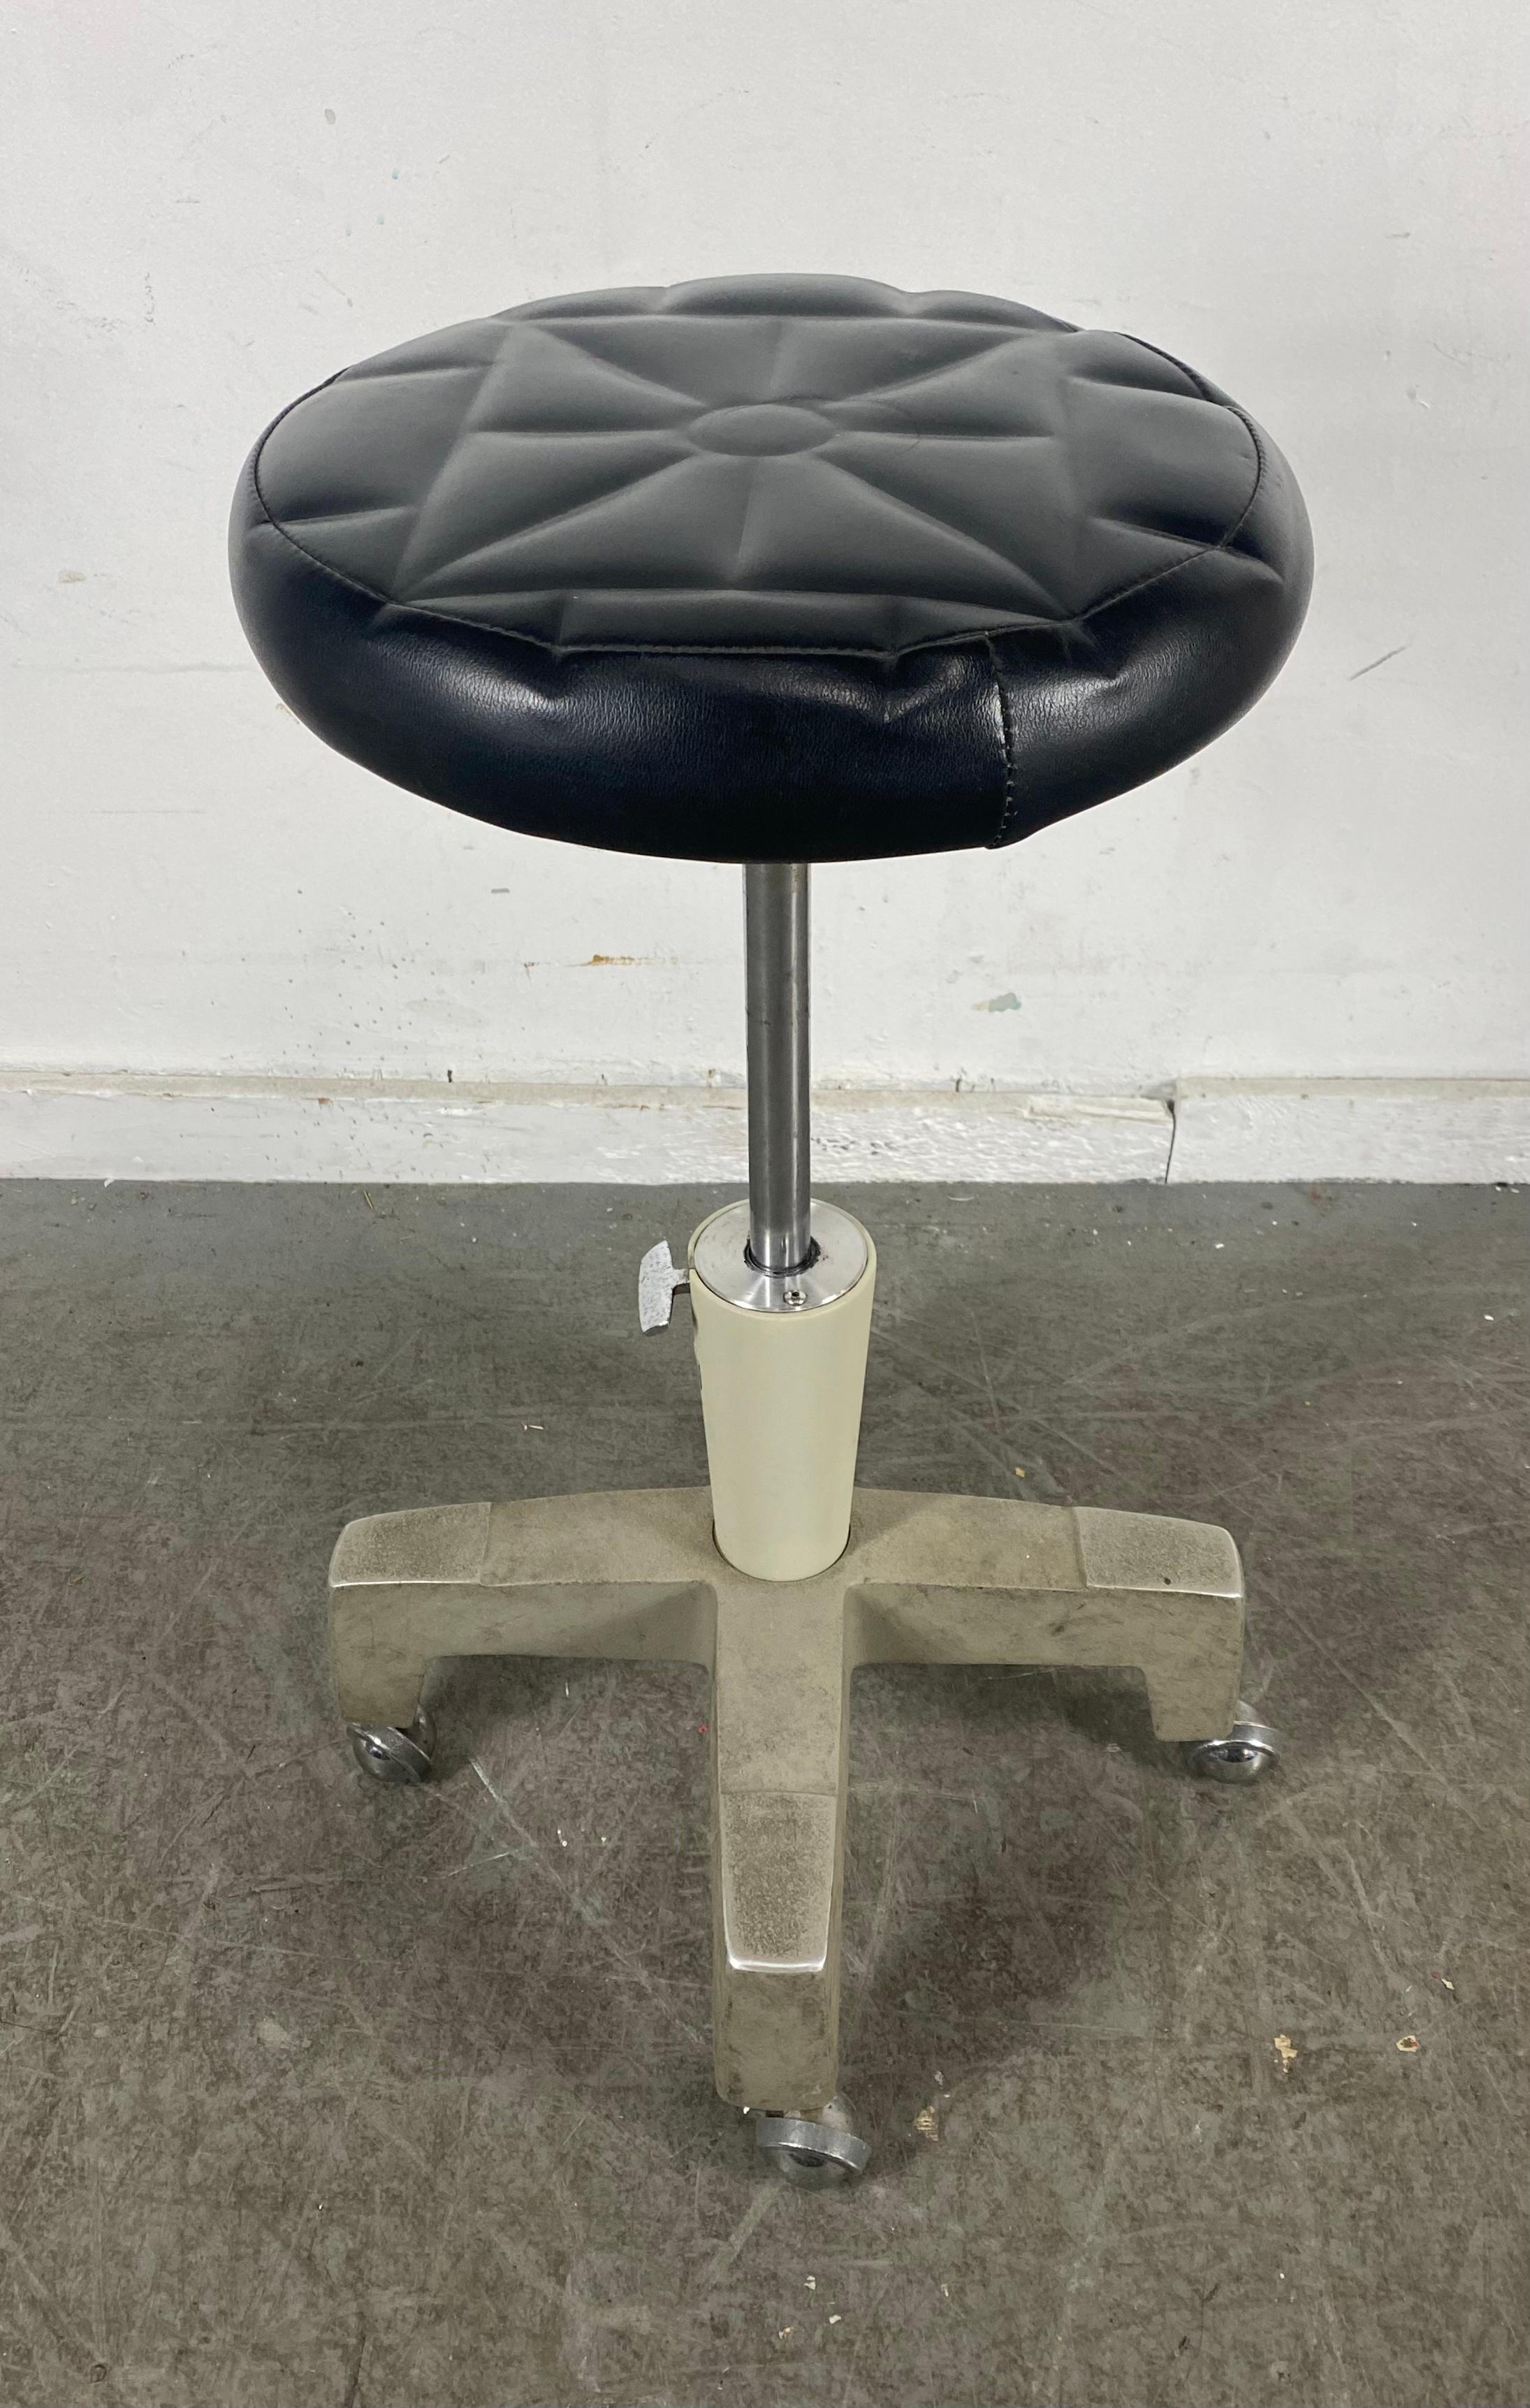 Cast Industrial Aluminum and Leather Adjustable Dentist Stool by Reichert